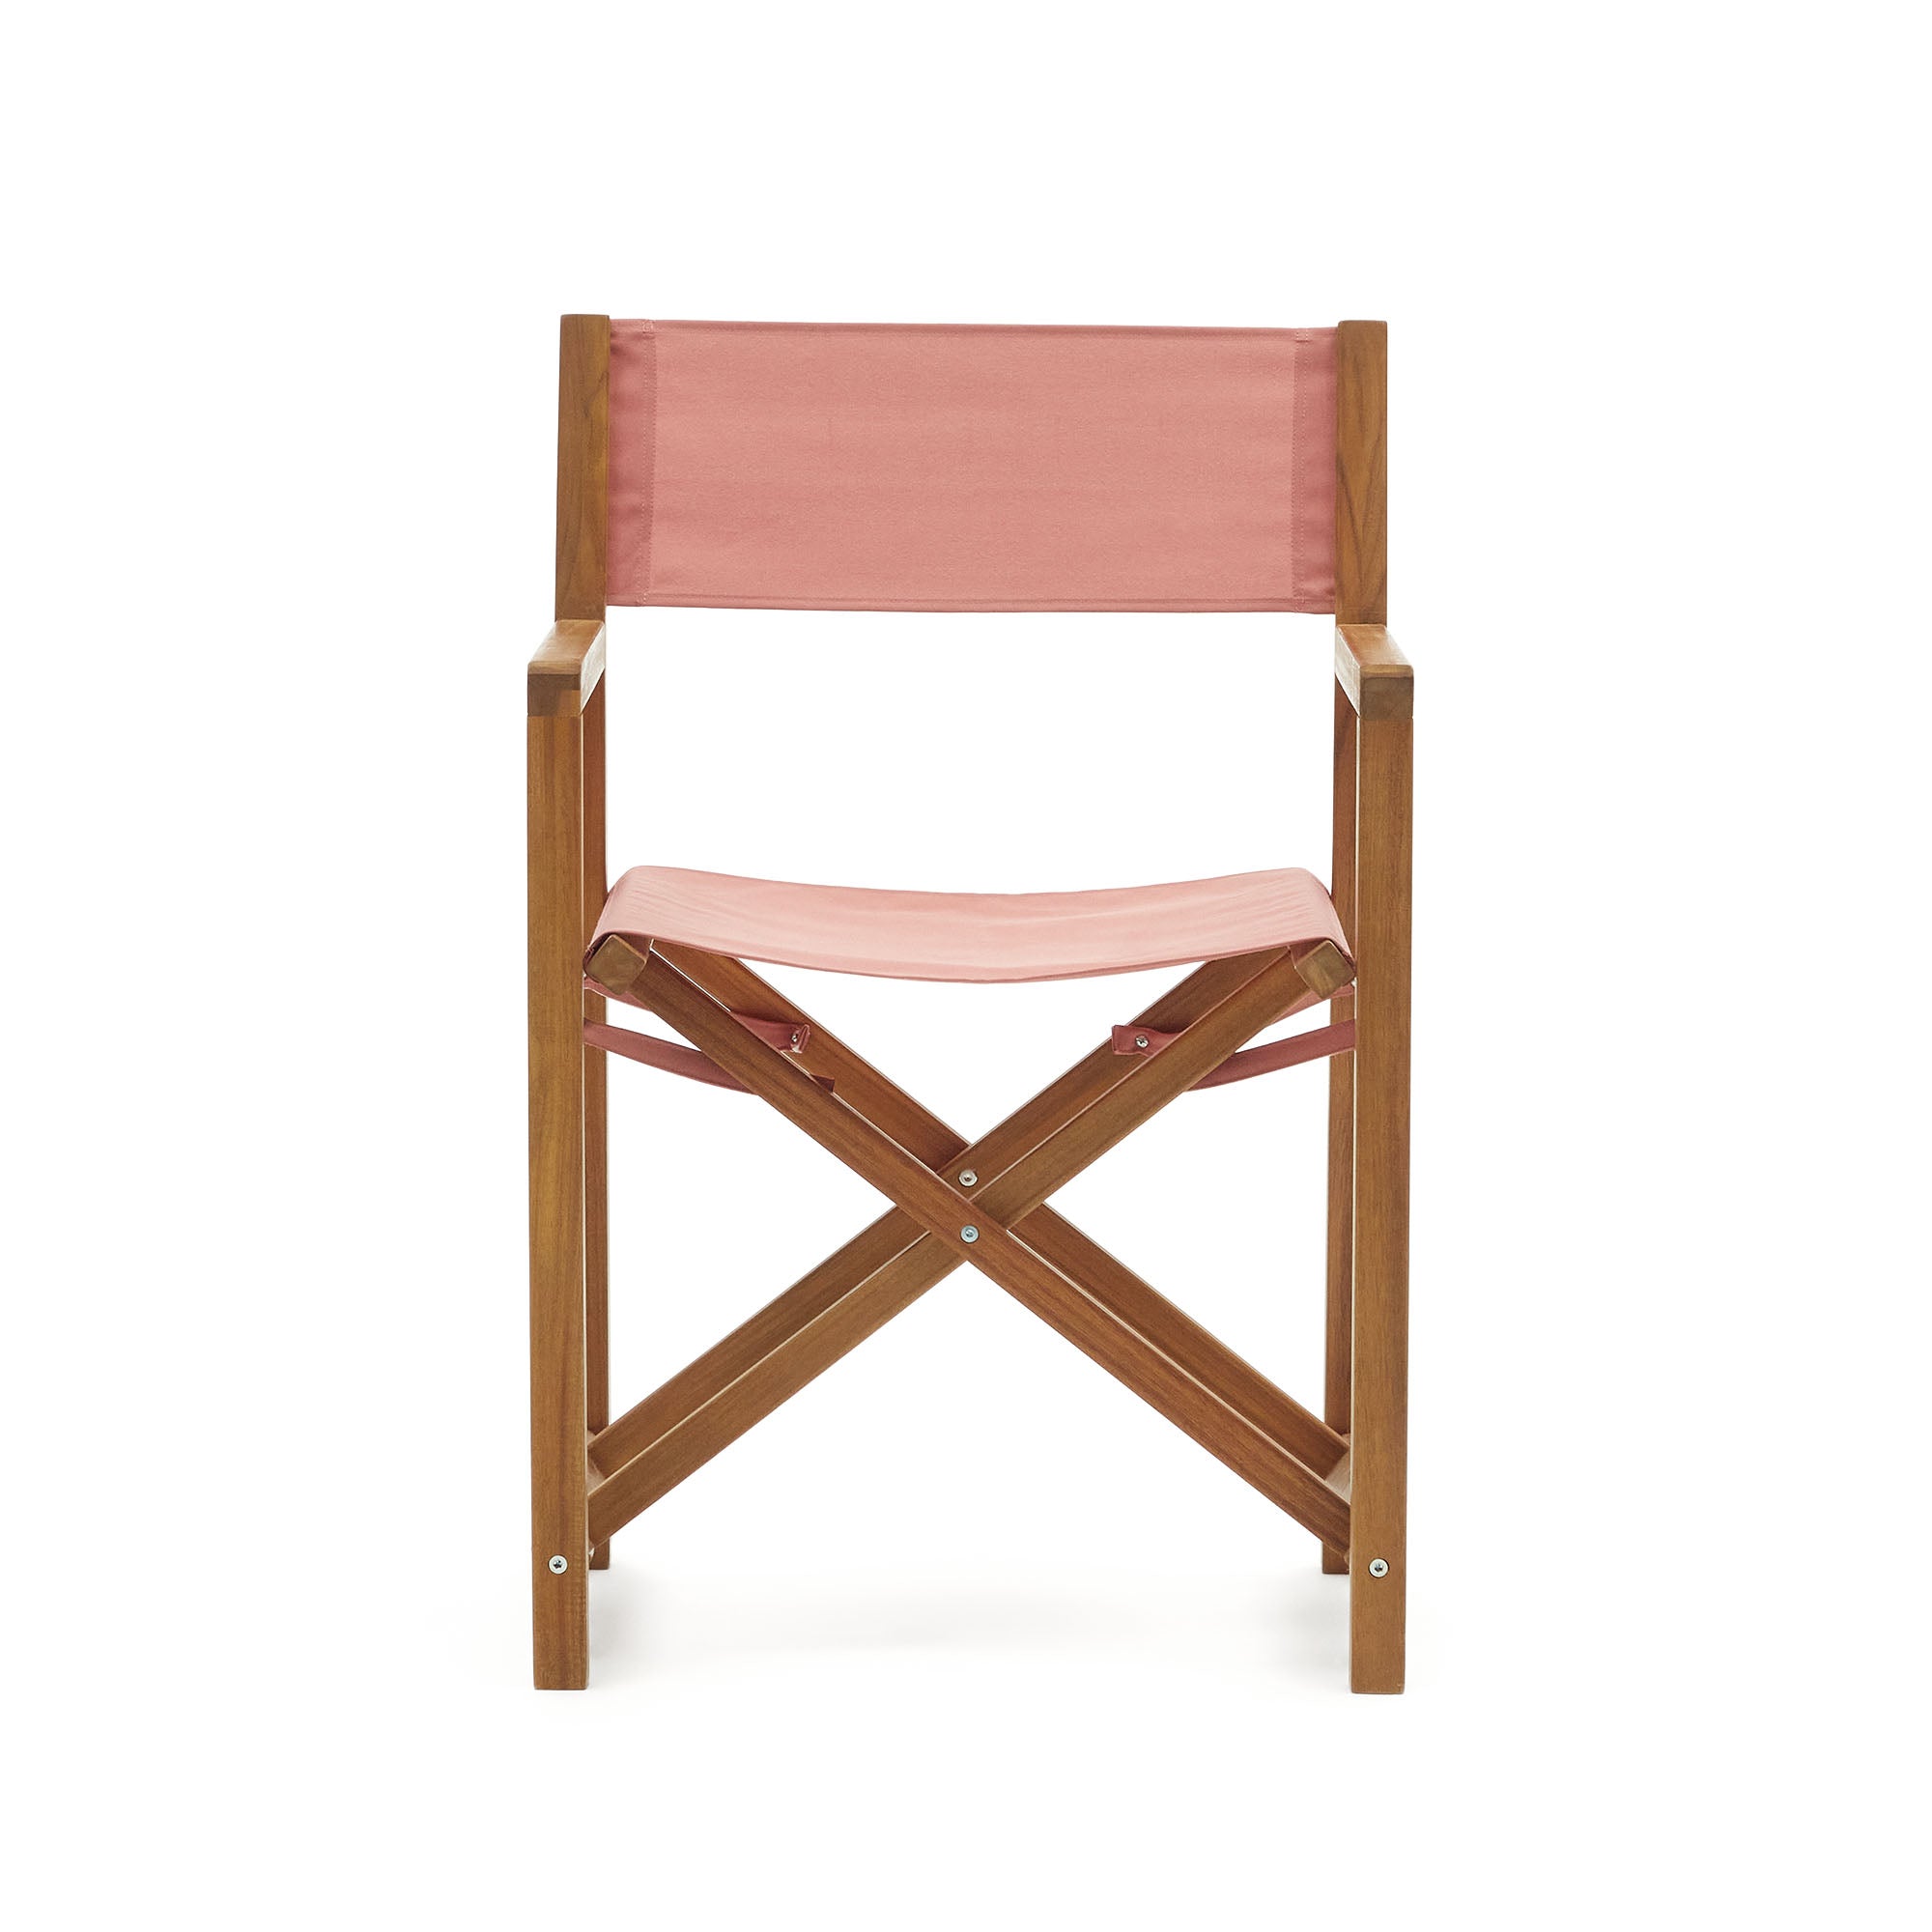 Thianna folding outdoor chair in terracotta with solid acacia wood FSC 100%